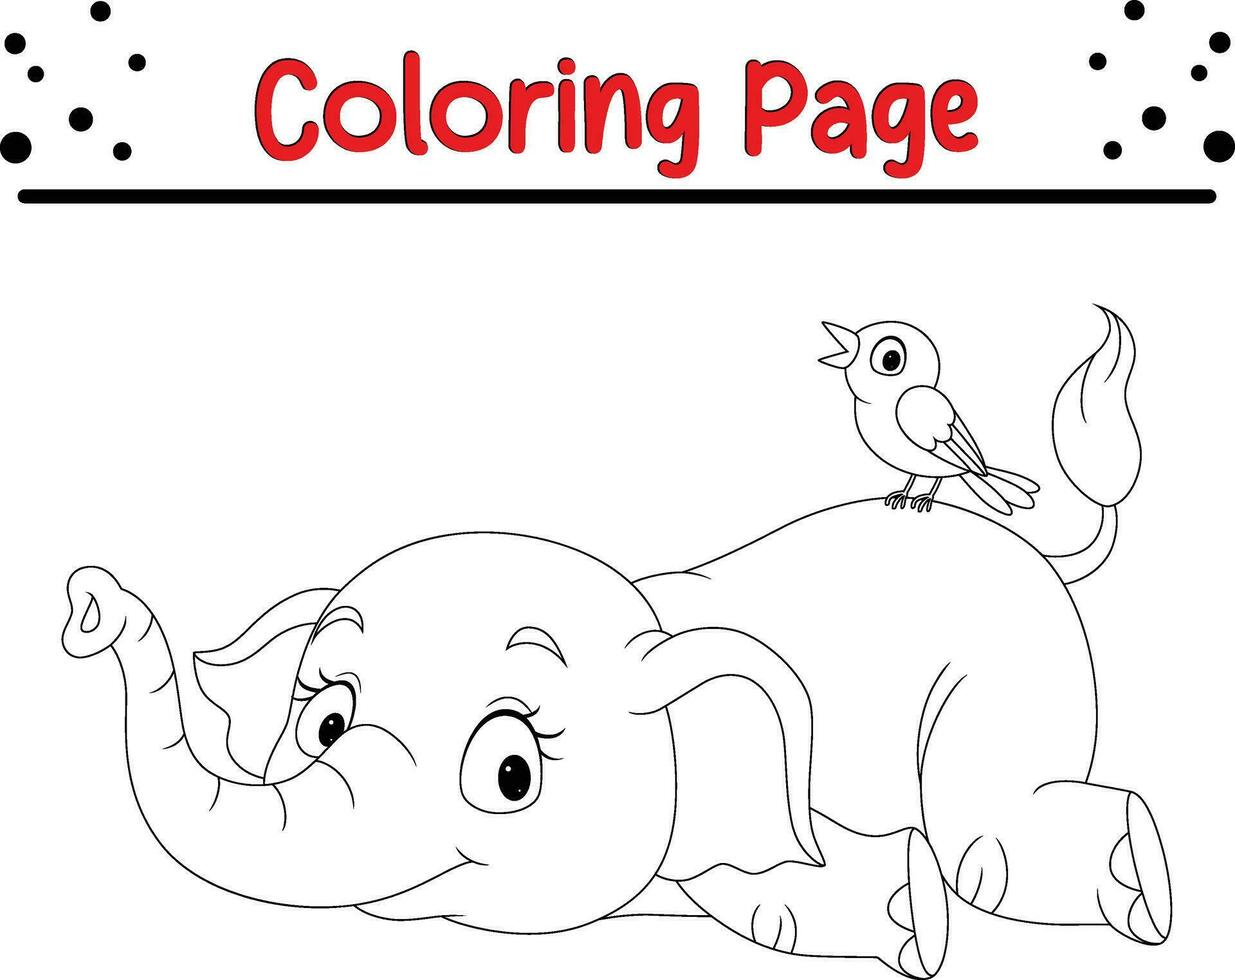 Cute Elephant coloring page for kids vector